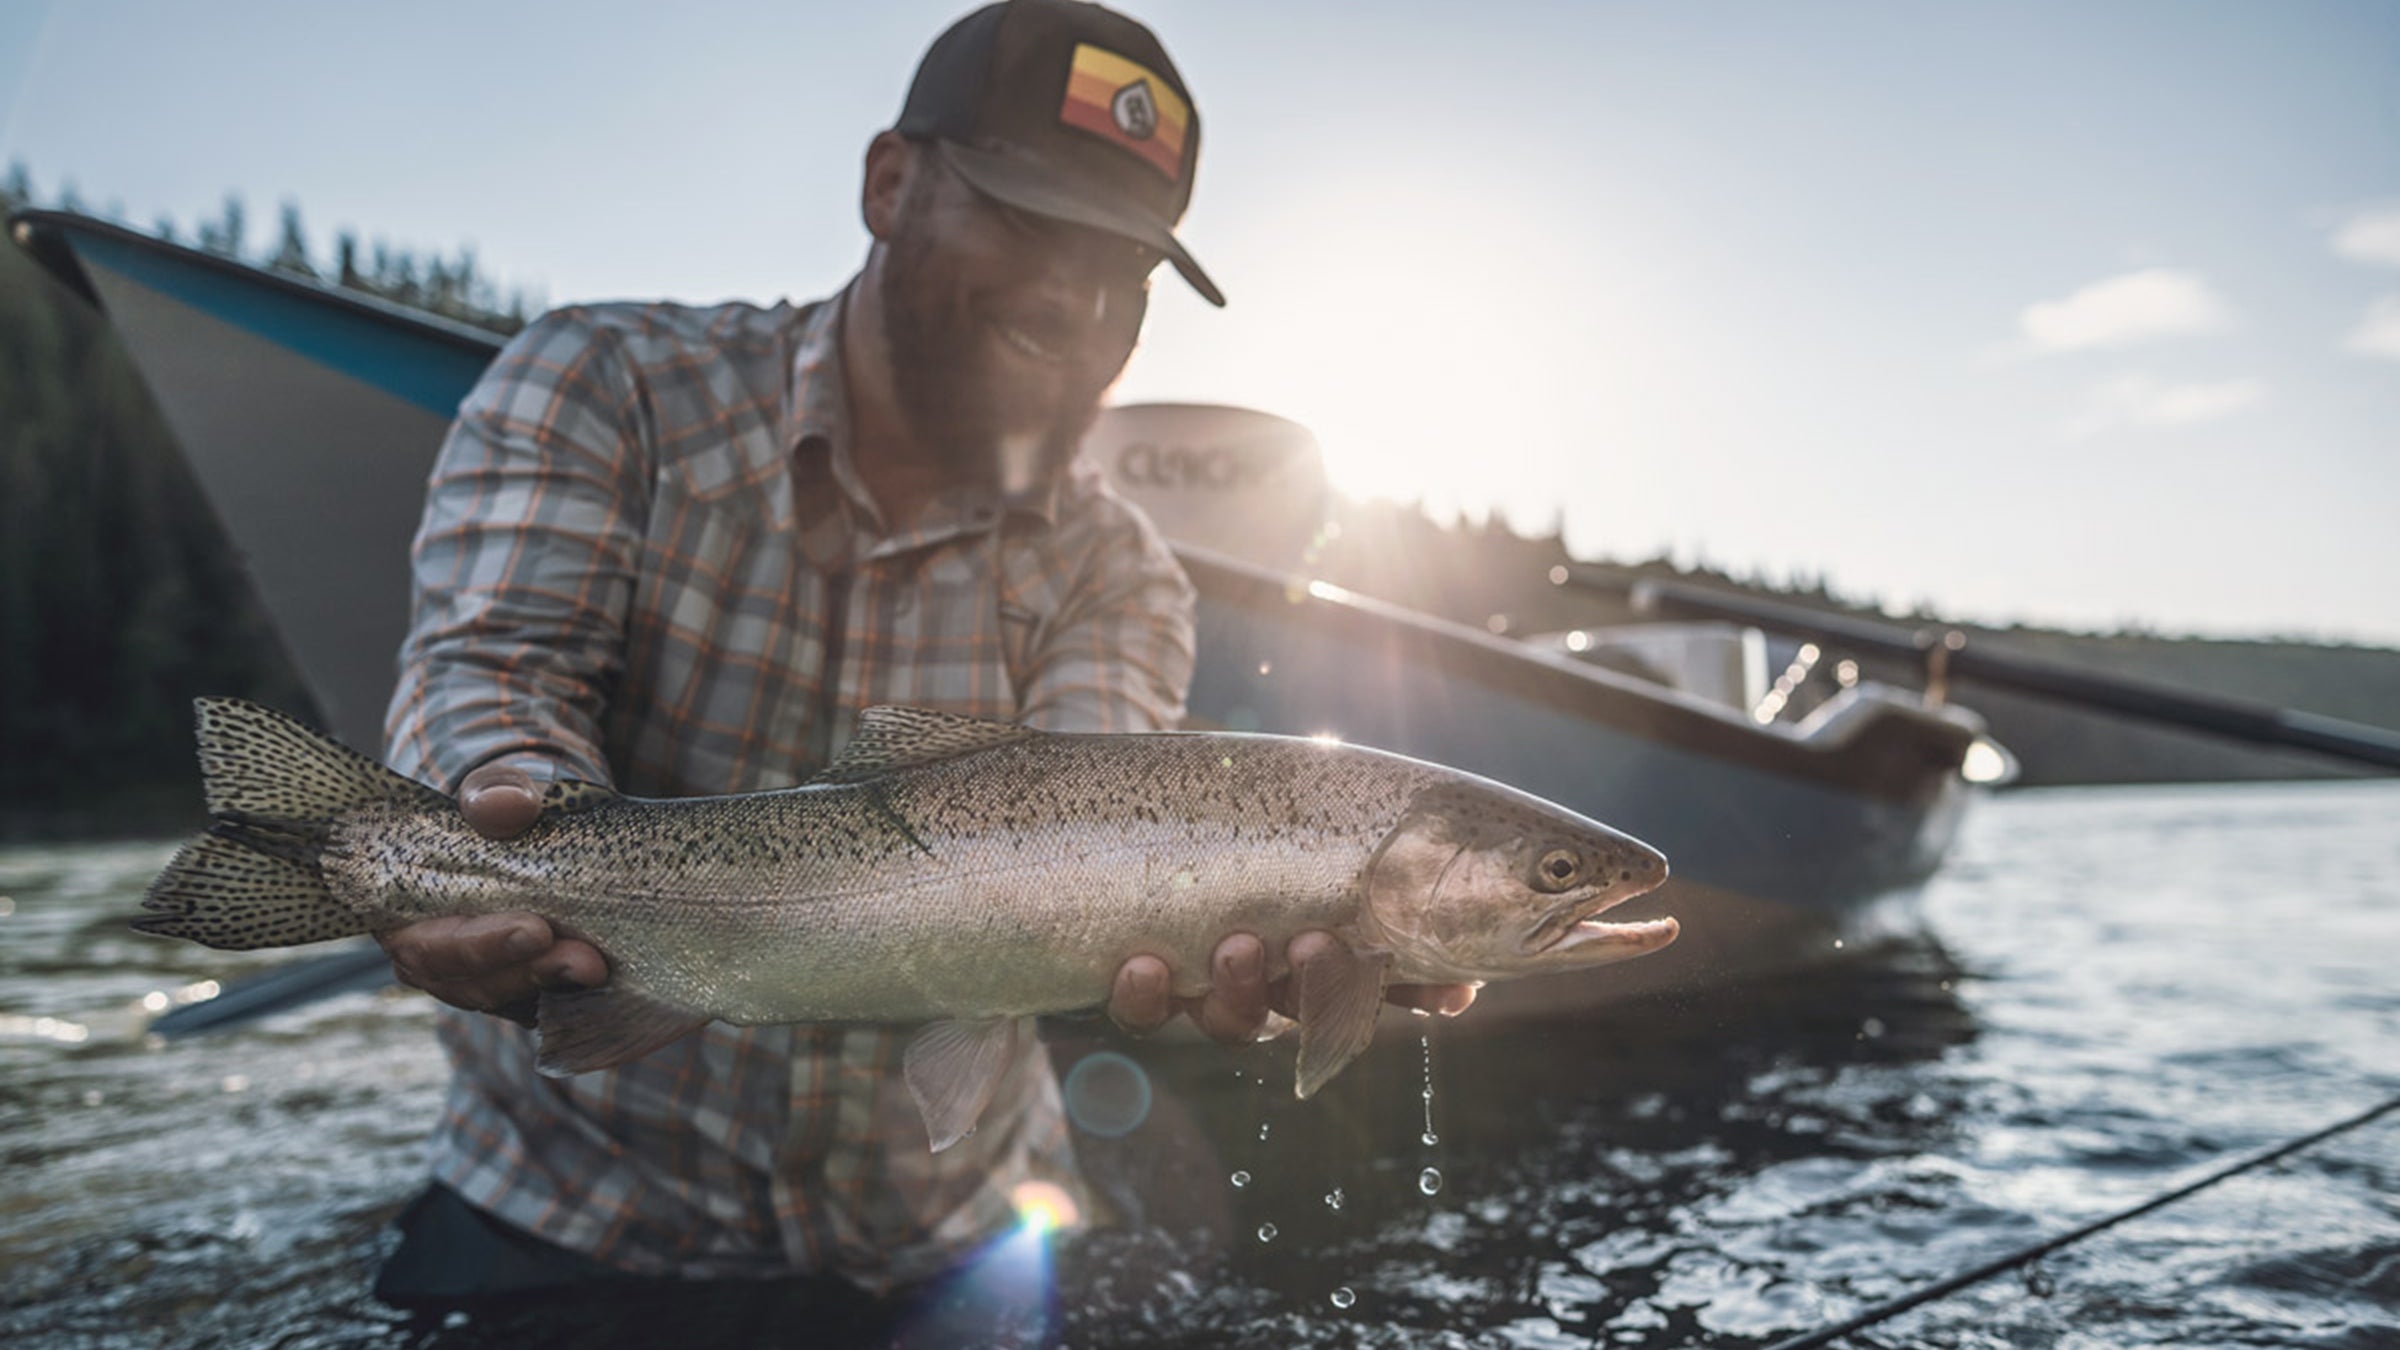 Salomone: Benefits from cleaning your fly fishing gear